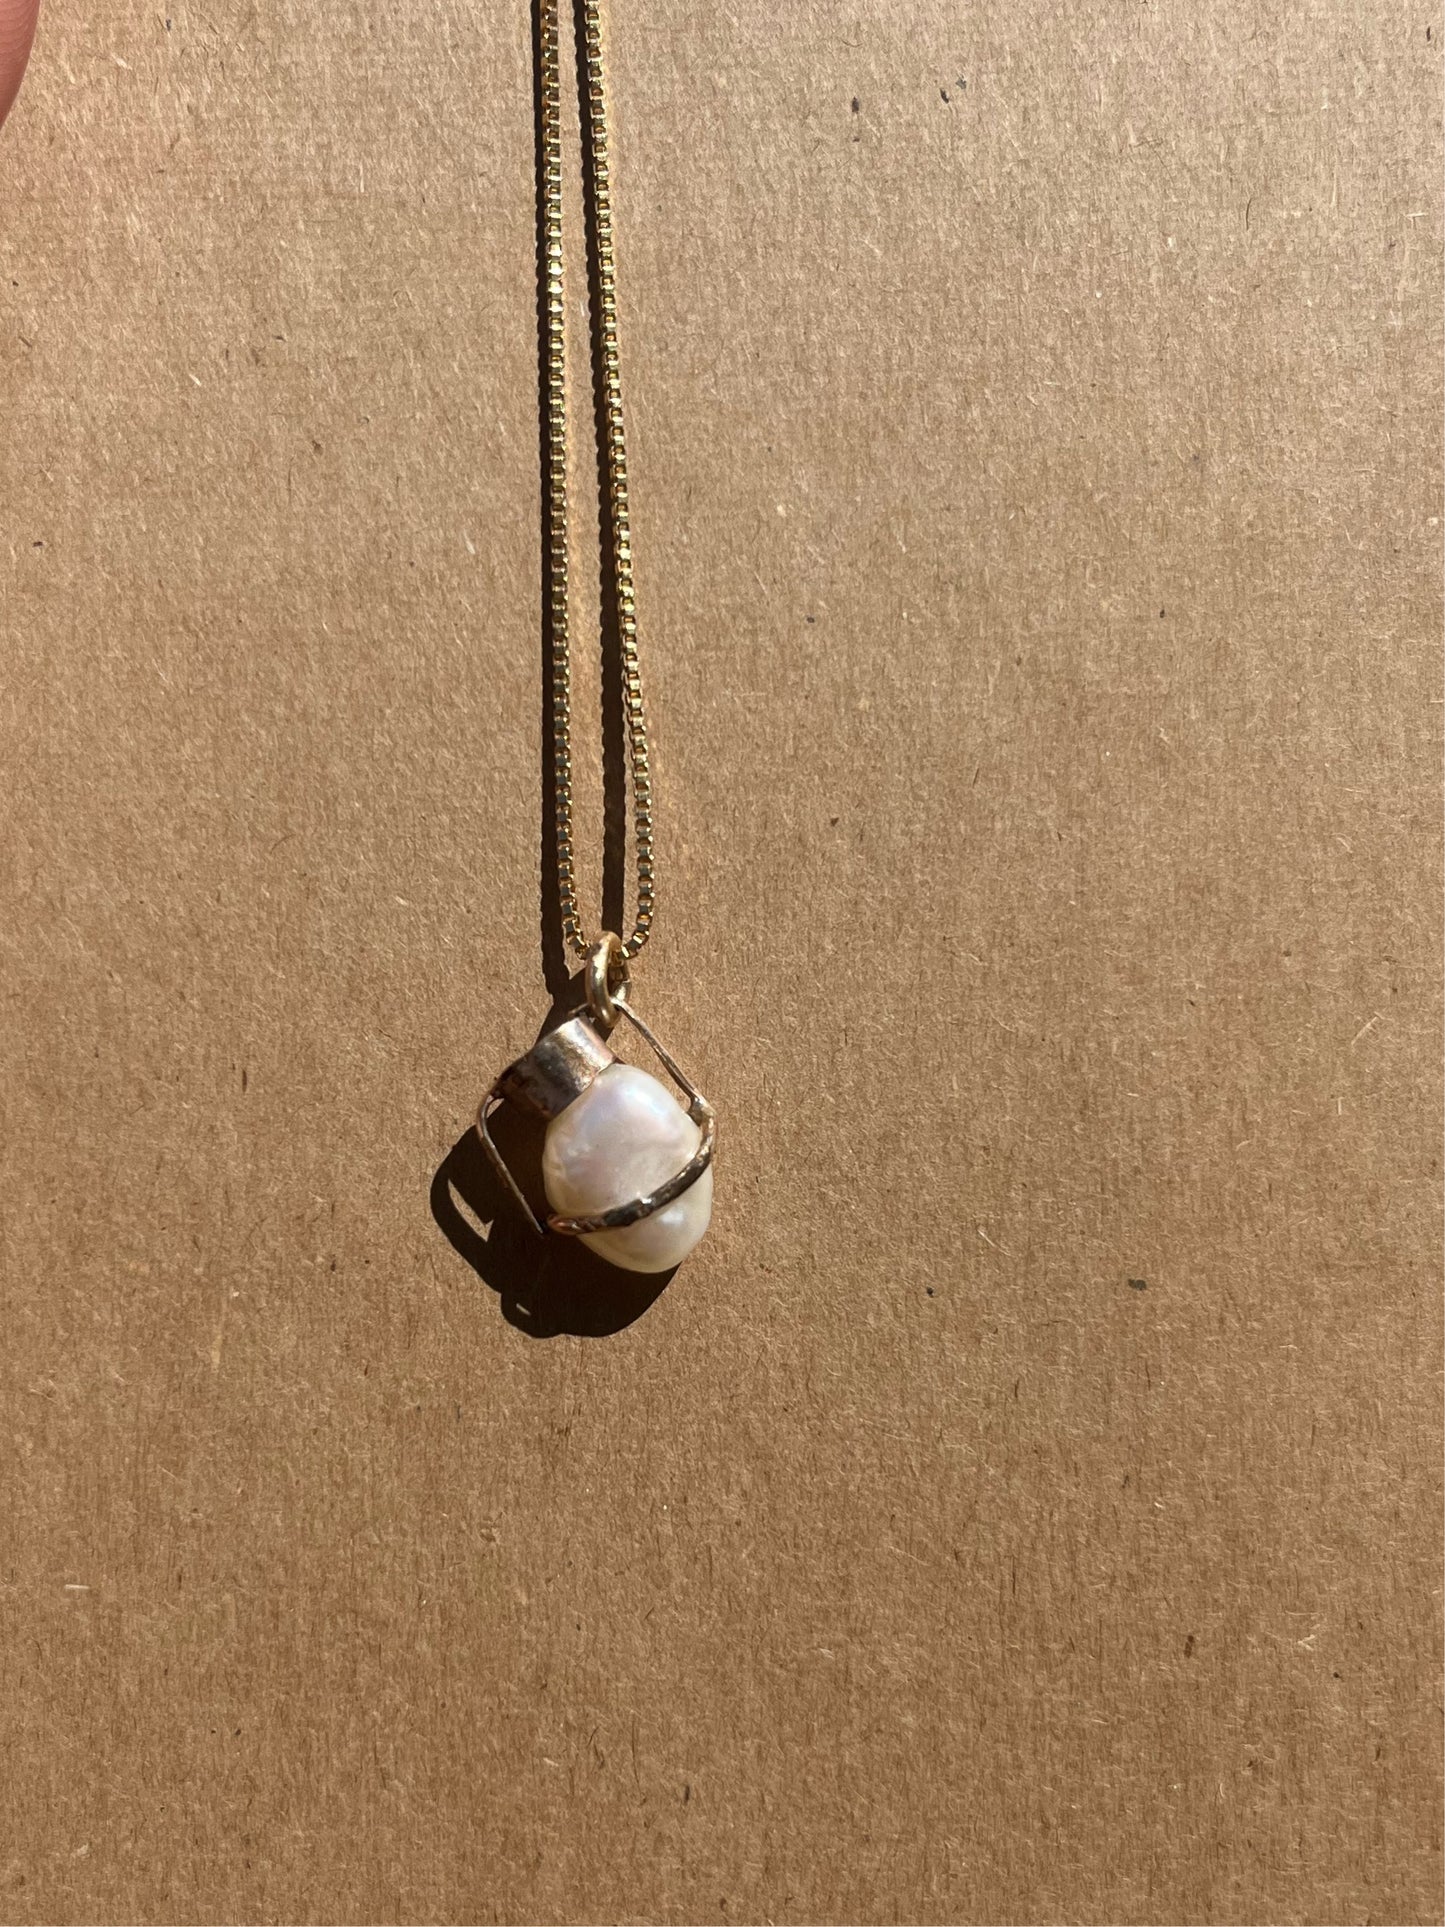 Pearl in 14k gold necklace by Bordine Designs